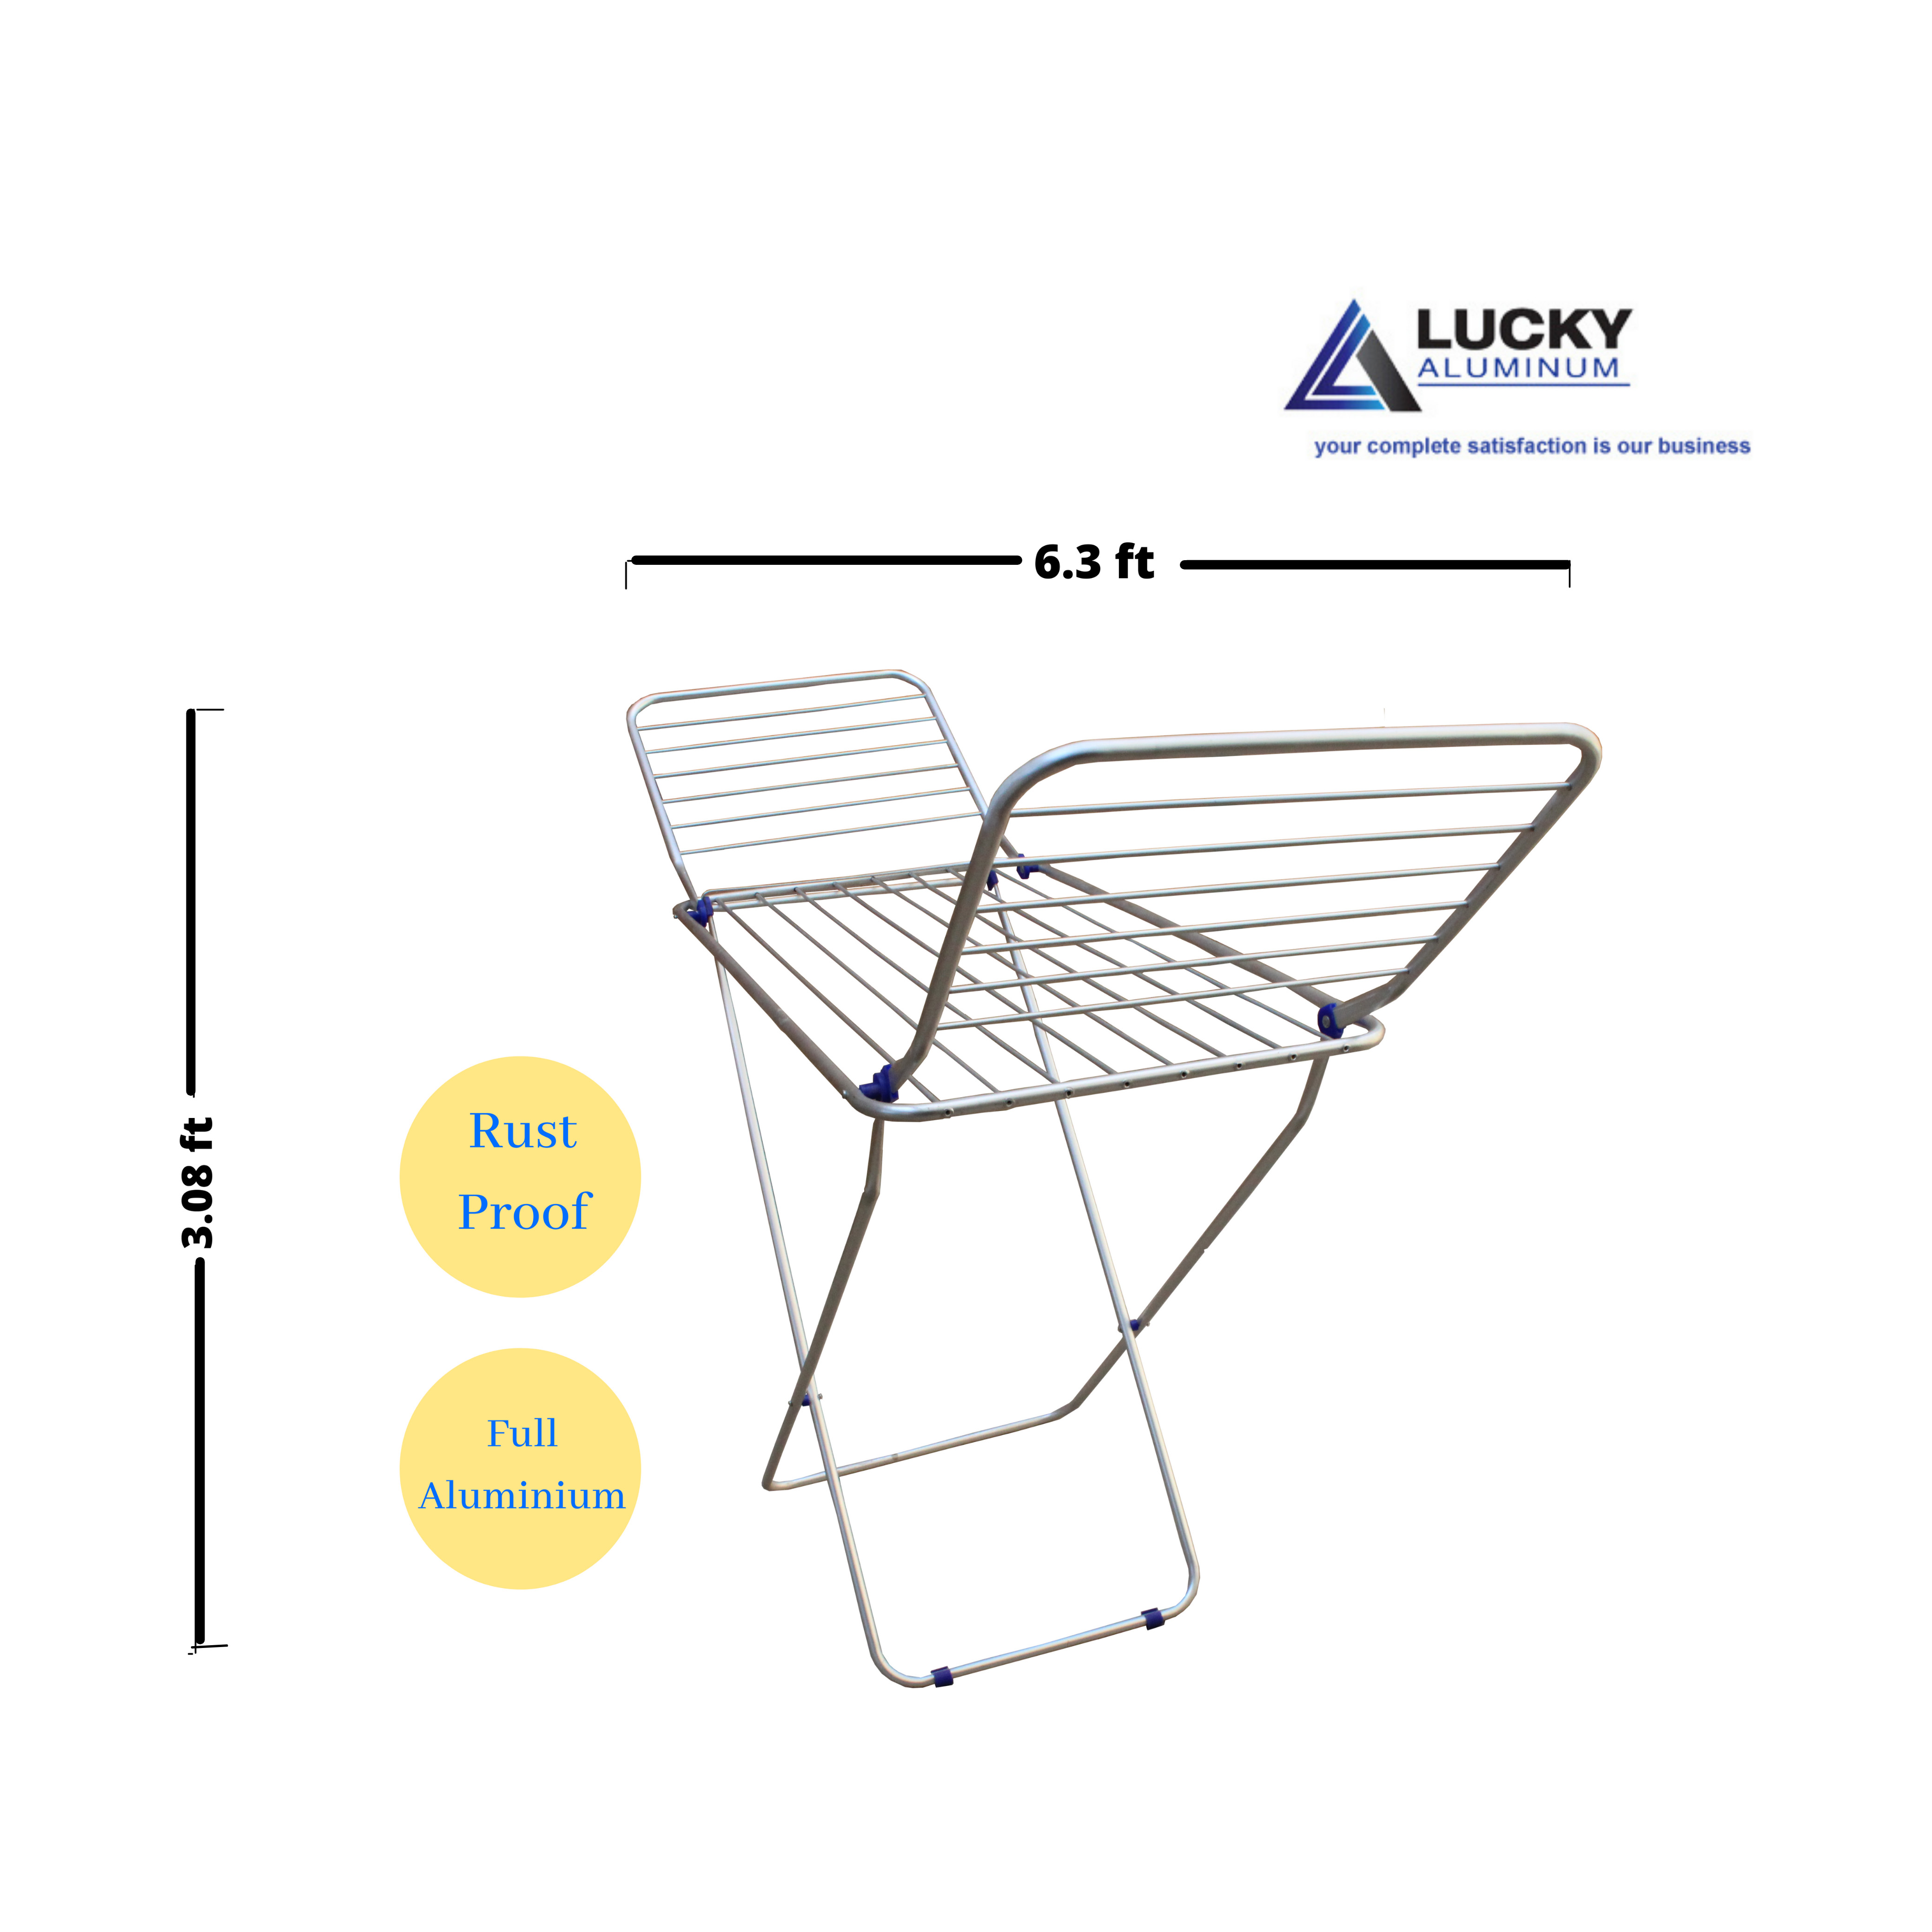 Lucky Aluminium Rust Proof Folding Cloth Dryer Stand 6.3 Feet Length - Weather Resistant, Long Lasting, Light Weight